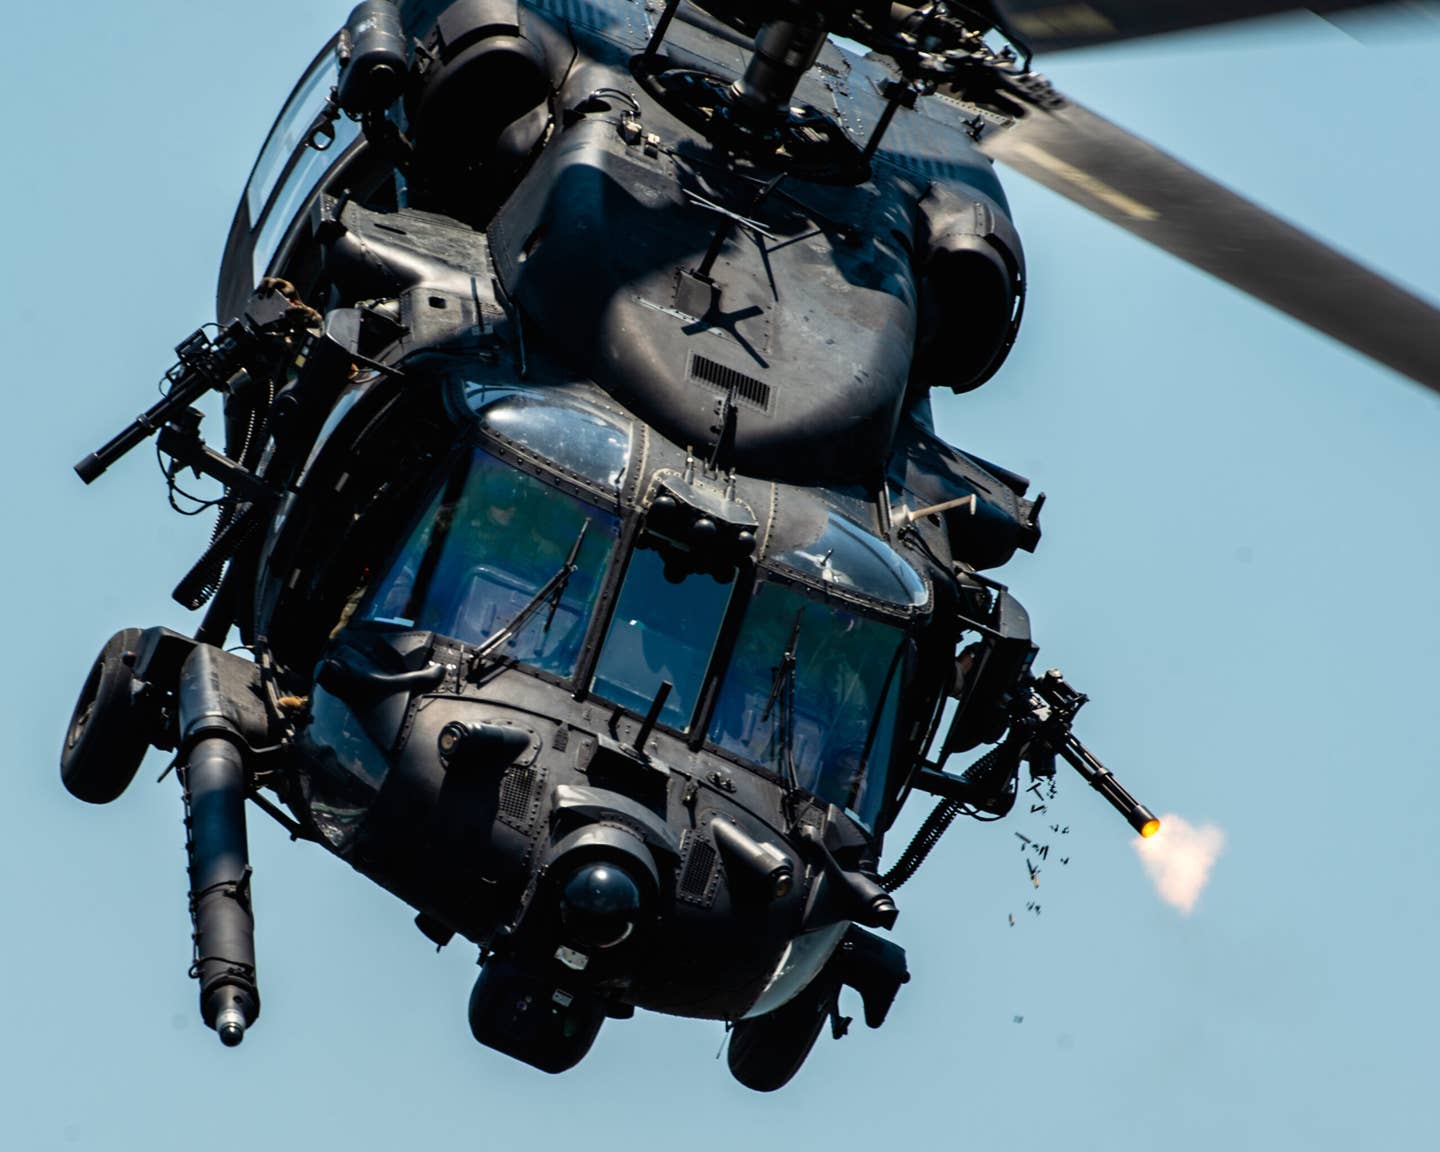 U.S. Special Operations Forces members fly over Tampa Bay, Florida in a U.S. Army MH-60 helicopter during a SOF capabilities demonstration on May 18, 2022. <em>Air Force photo by Staff Sgt. Alexander Cook</em>